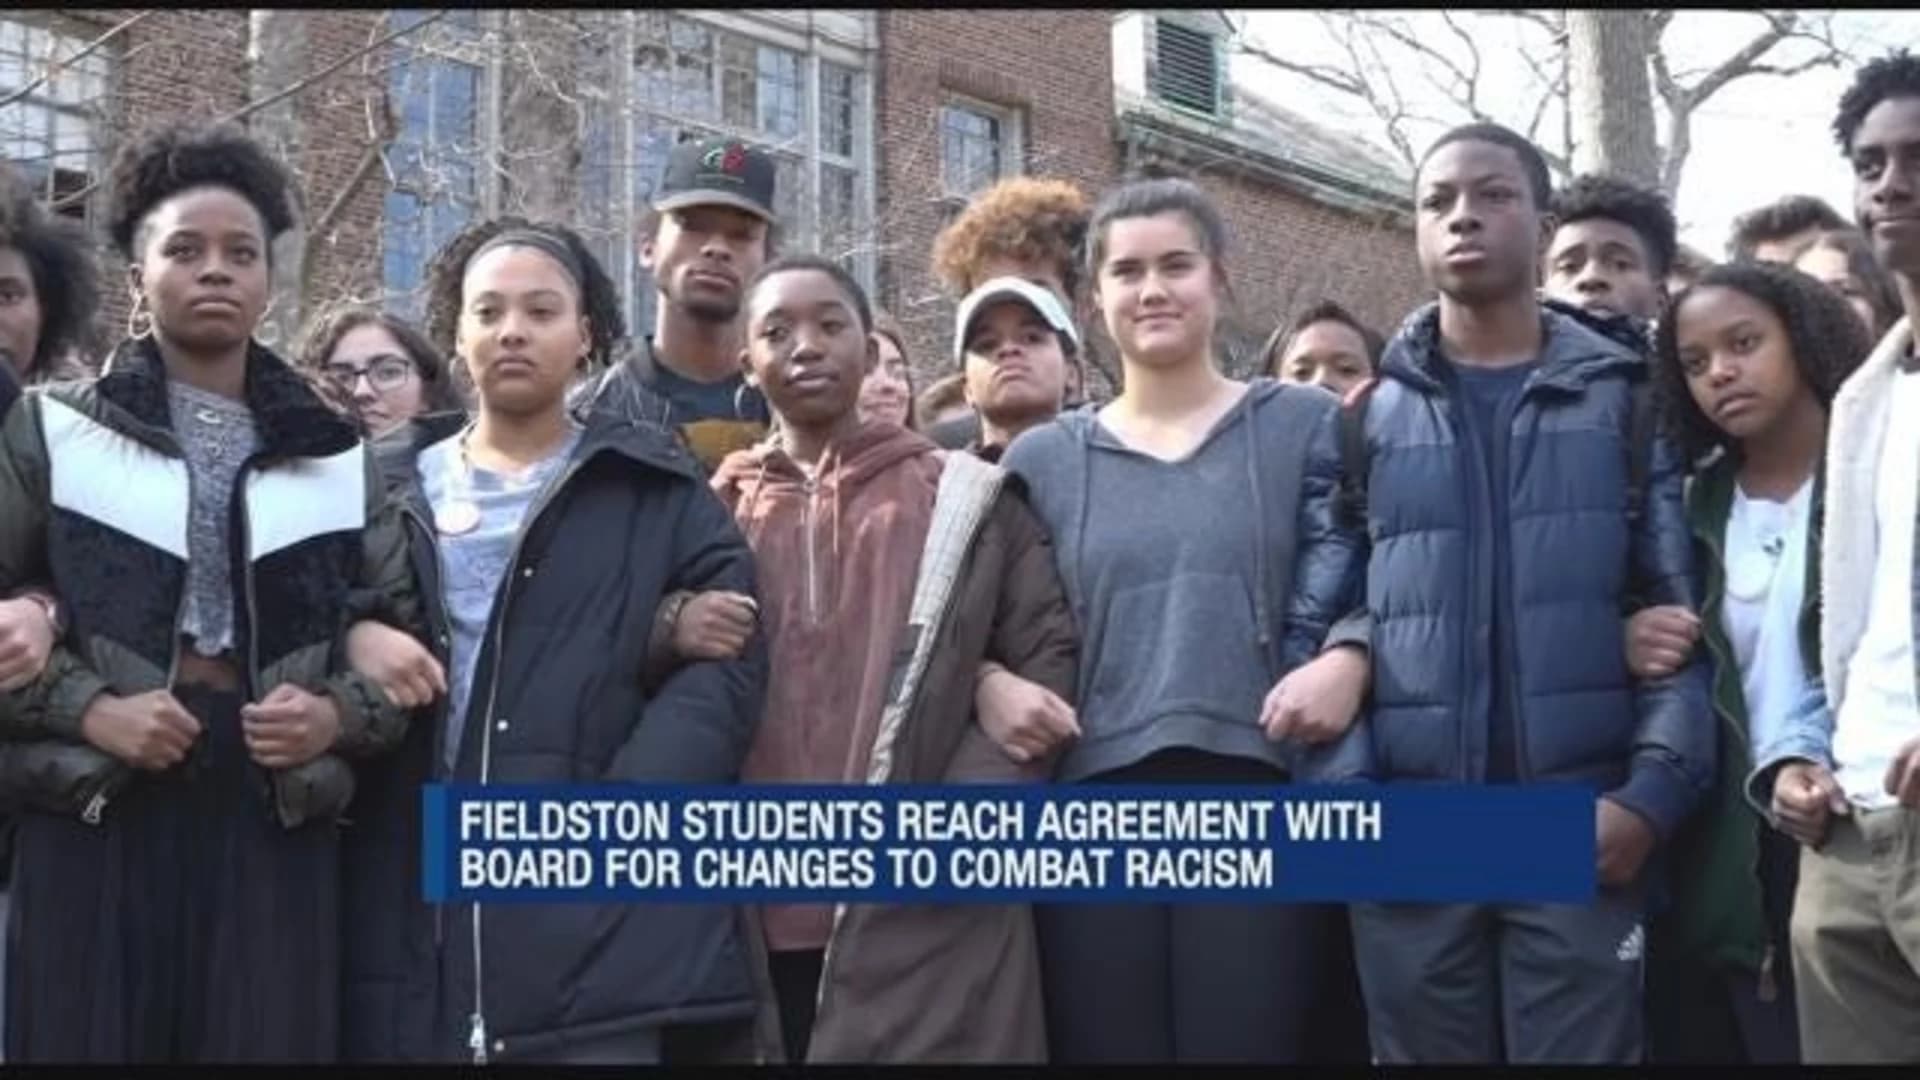 Fieldston students end lock out, reach agreement with administration